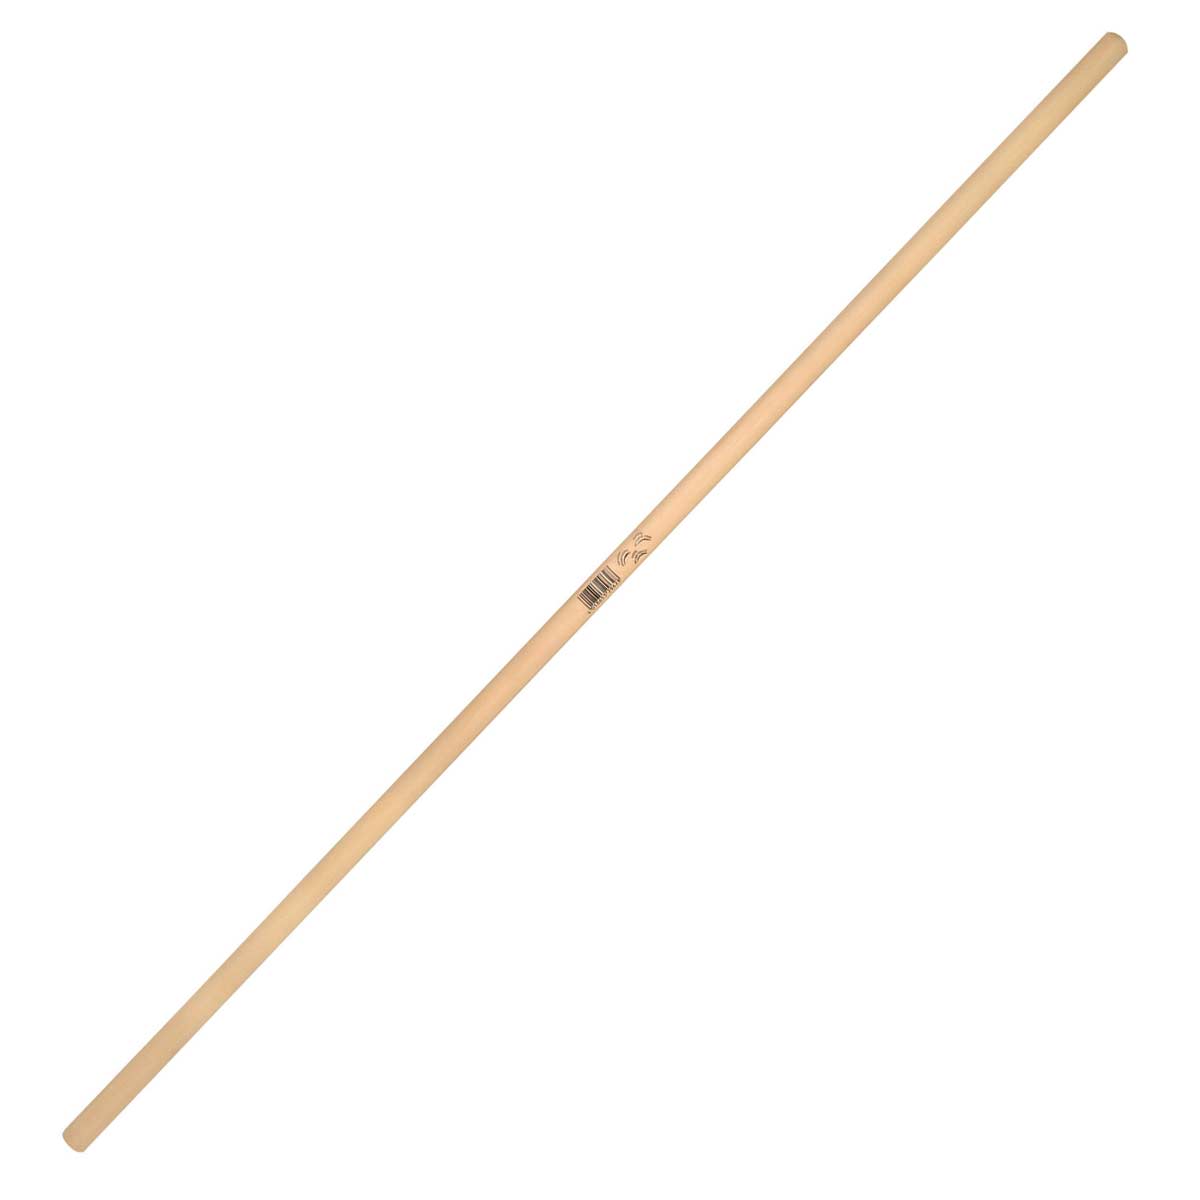 Tool and broomstick wood 130 cm